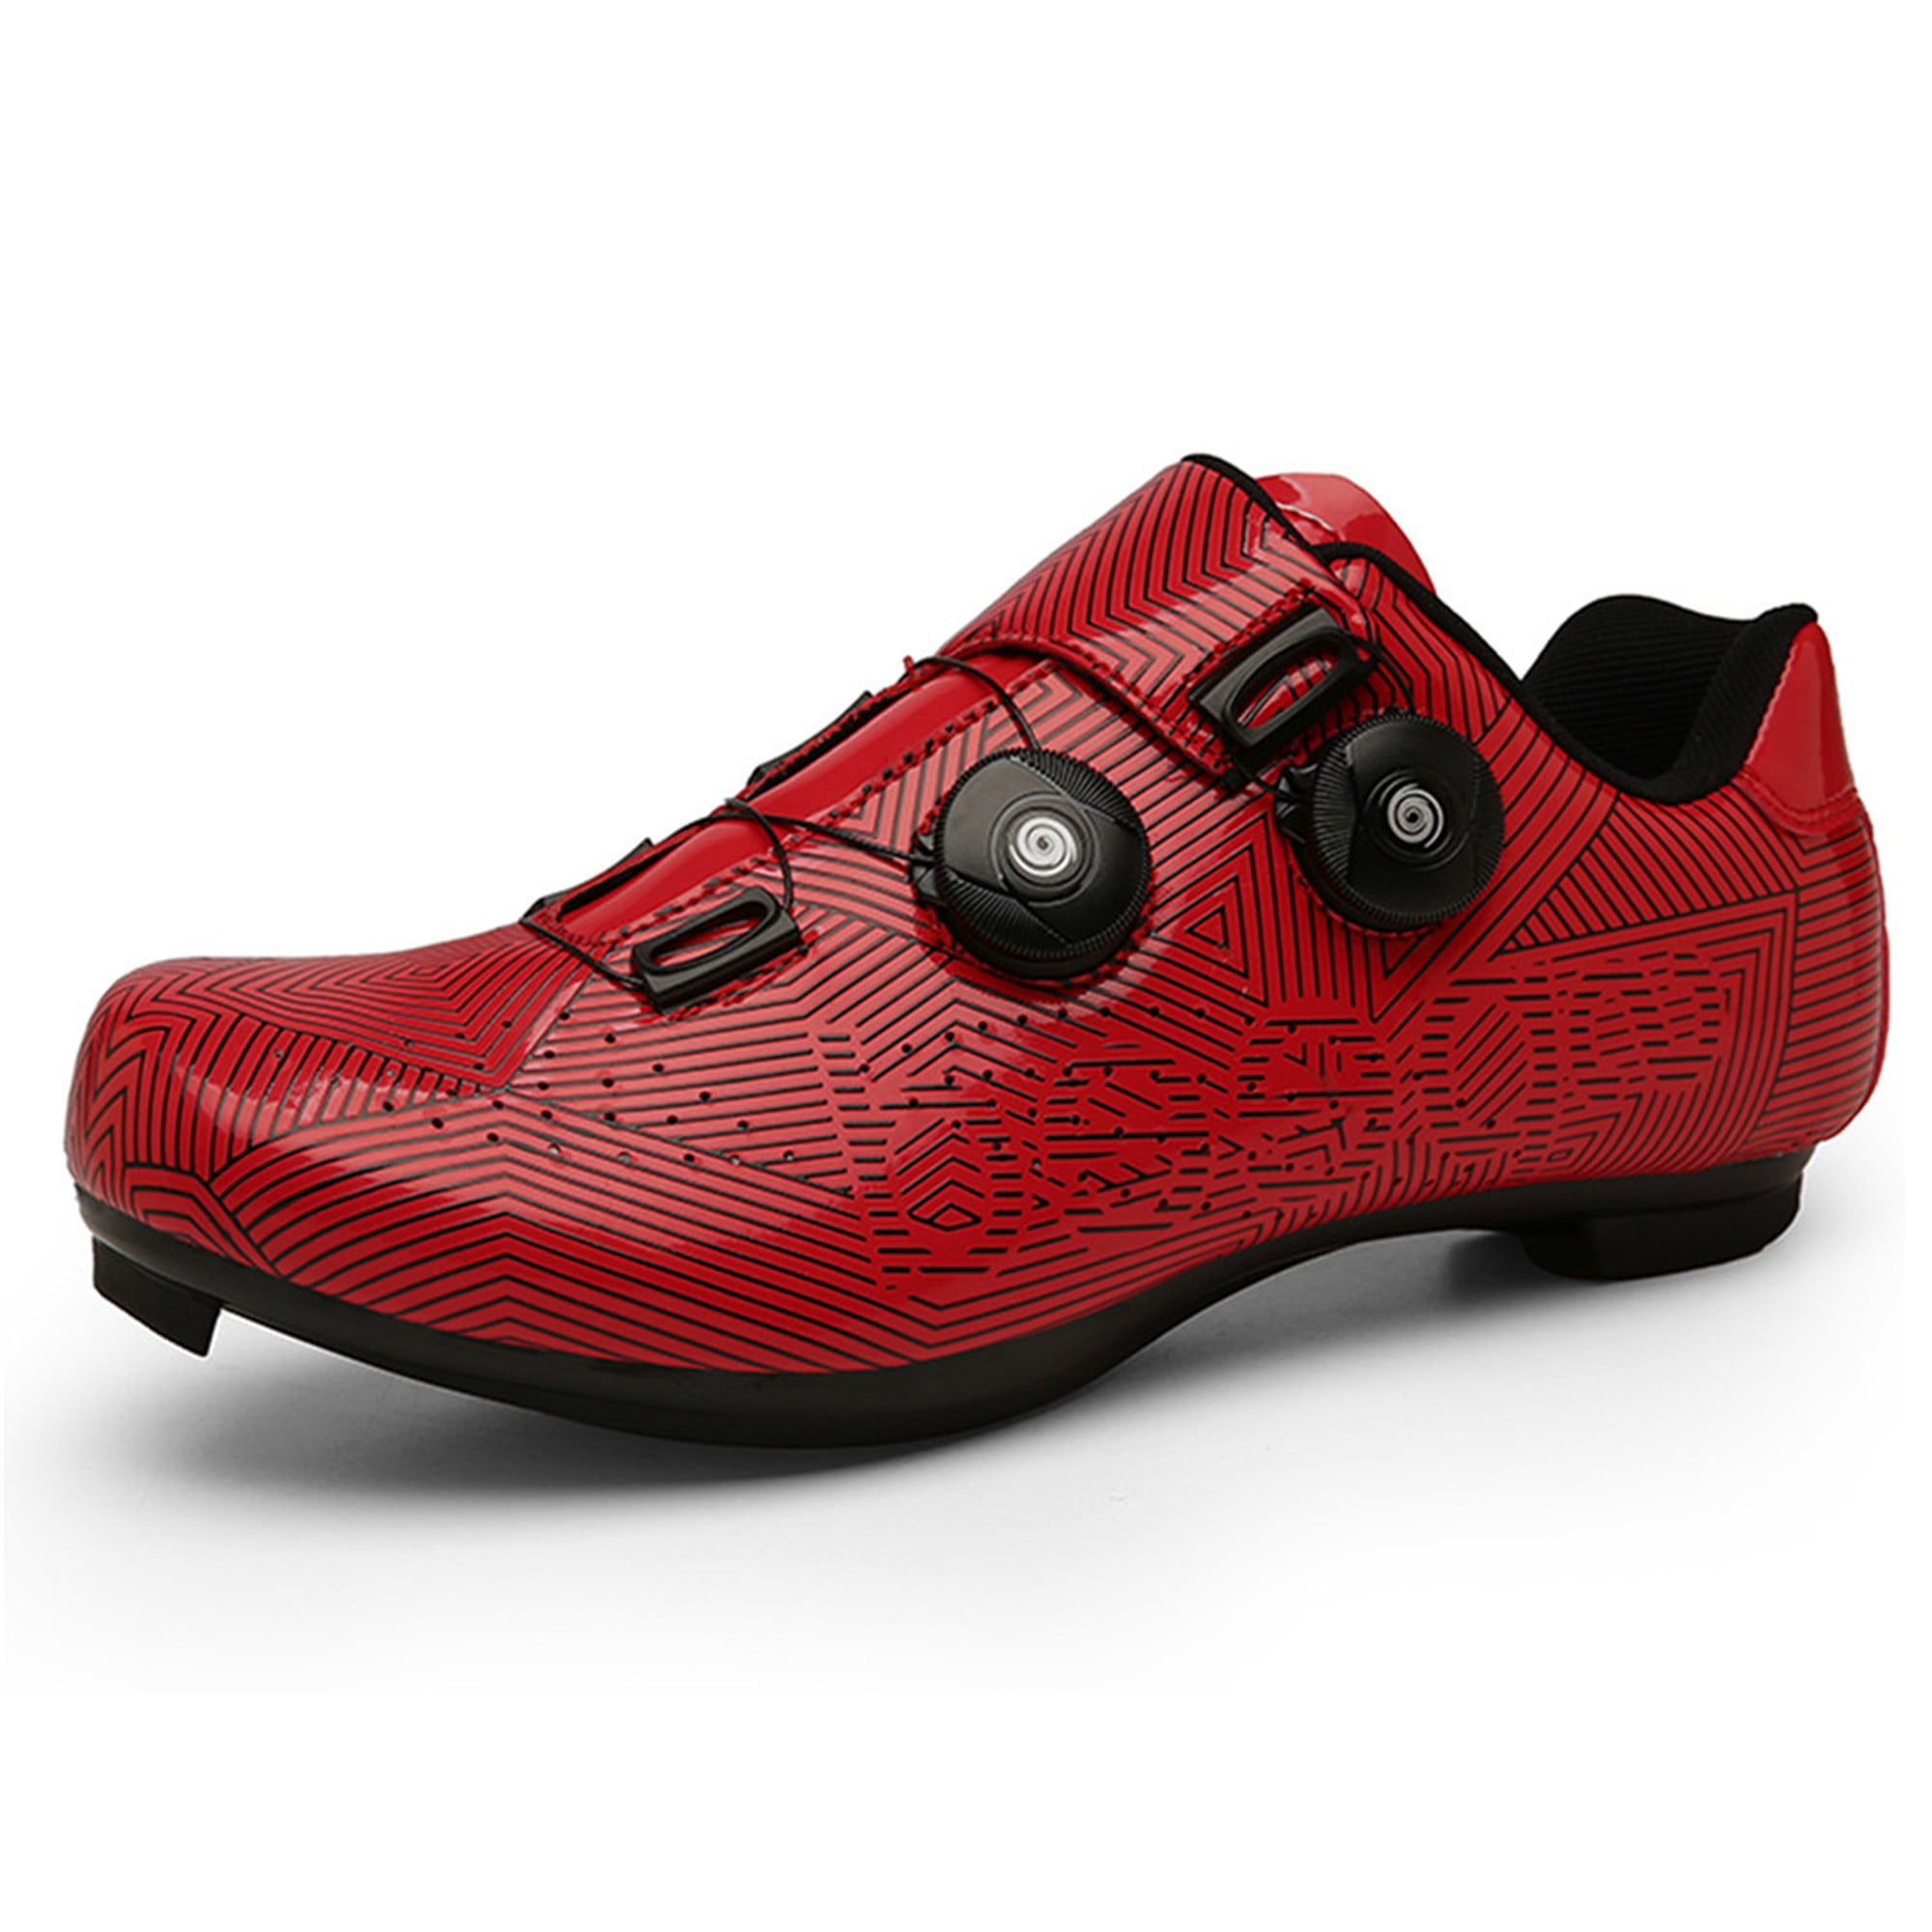 Mountain Bike Shoes Men Cycling Sneakers Bicycle Shoes SPD Indoor Peloton Cleats 